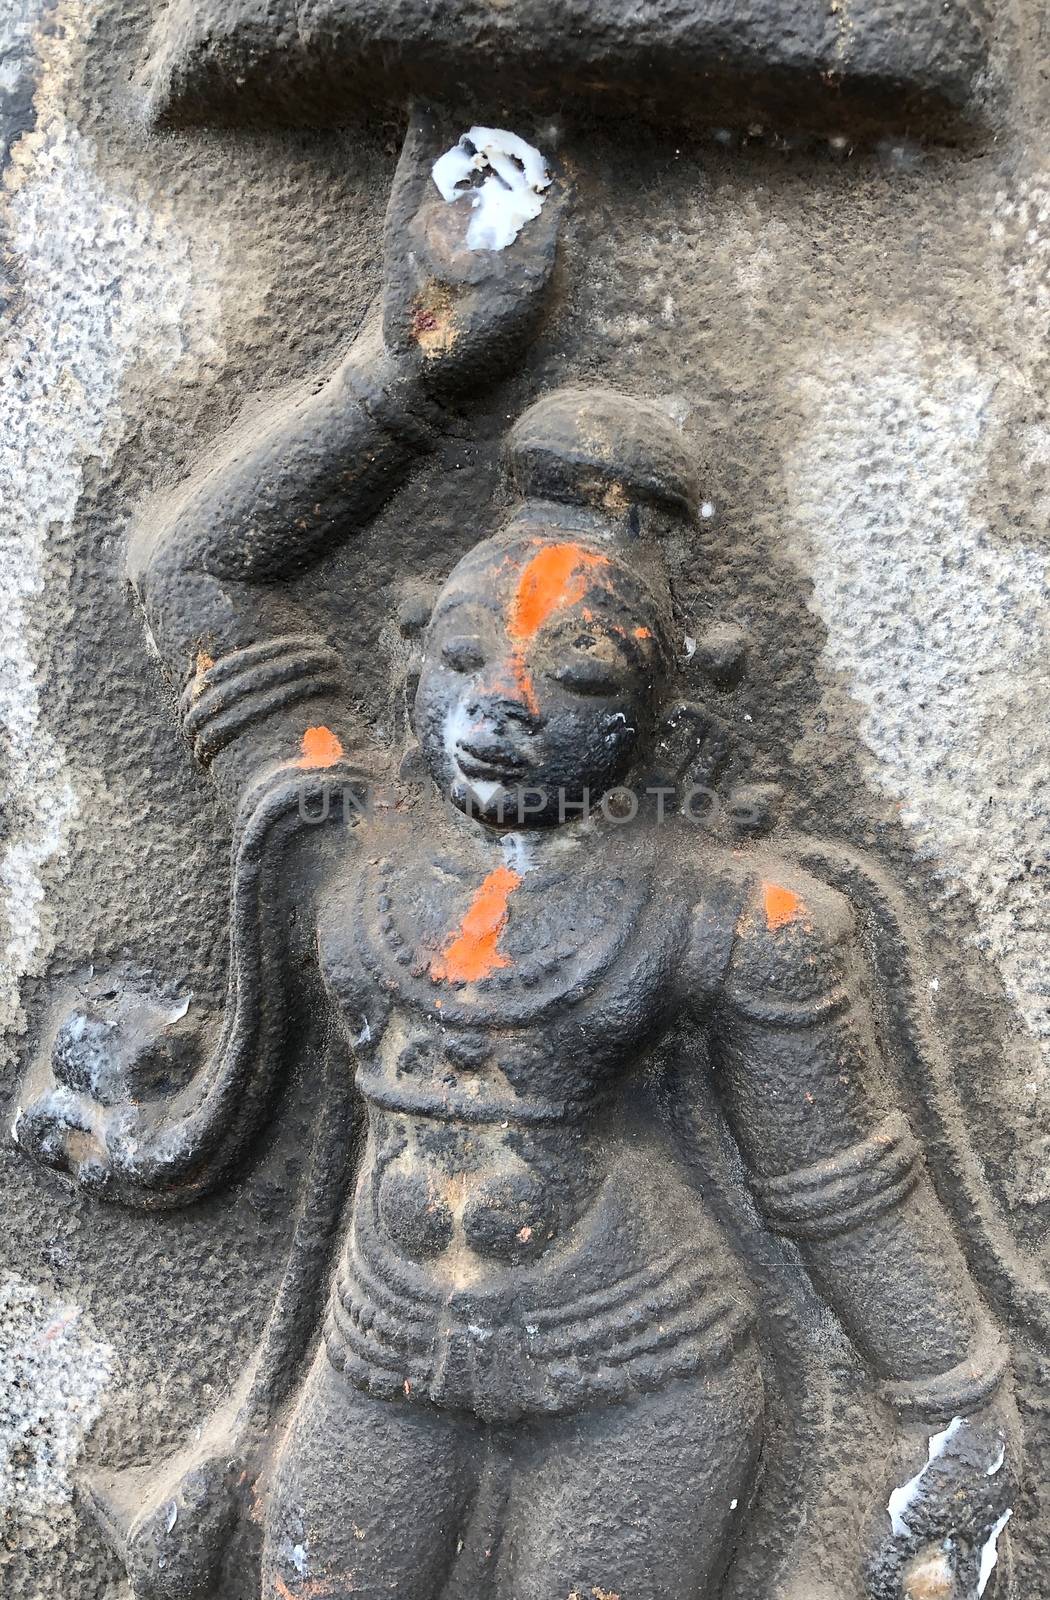 Sculpture of God Krishna holding the mountain. Bas relief sculpture carved in the stone wall of Shiva temple, Tamil nadu by prabhakaran851